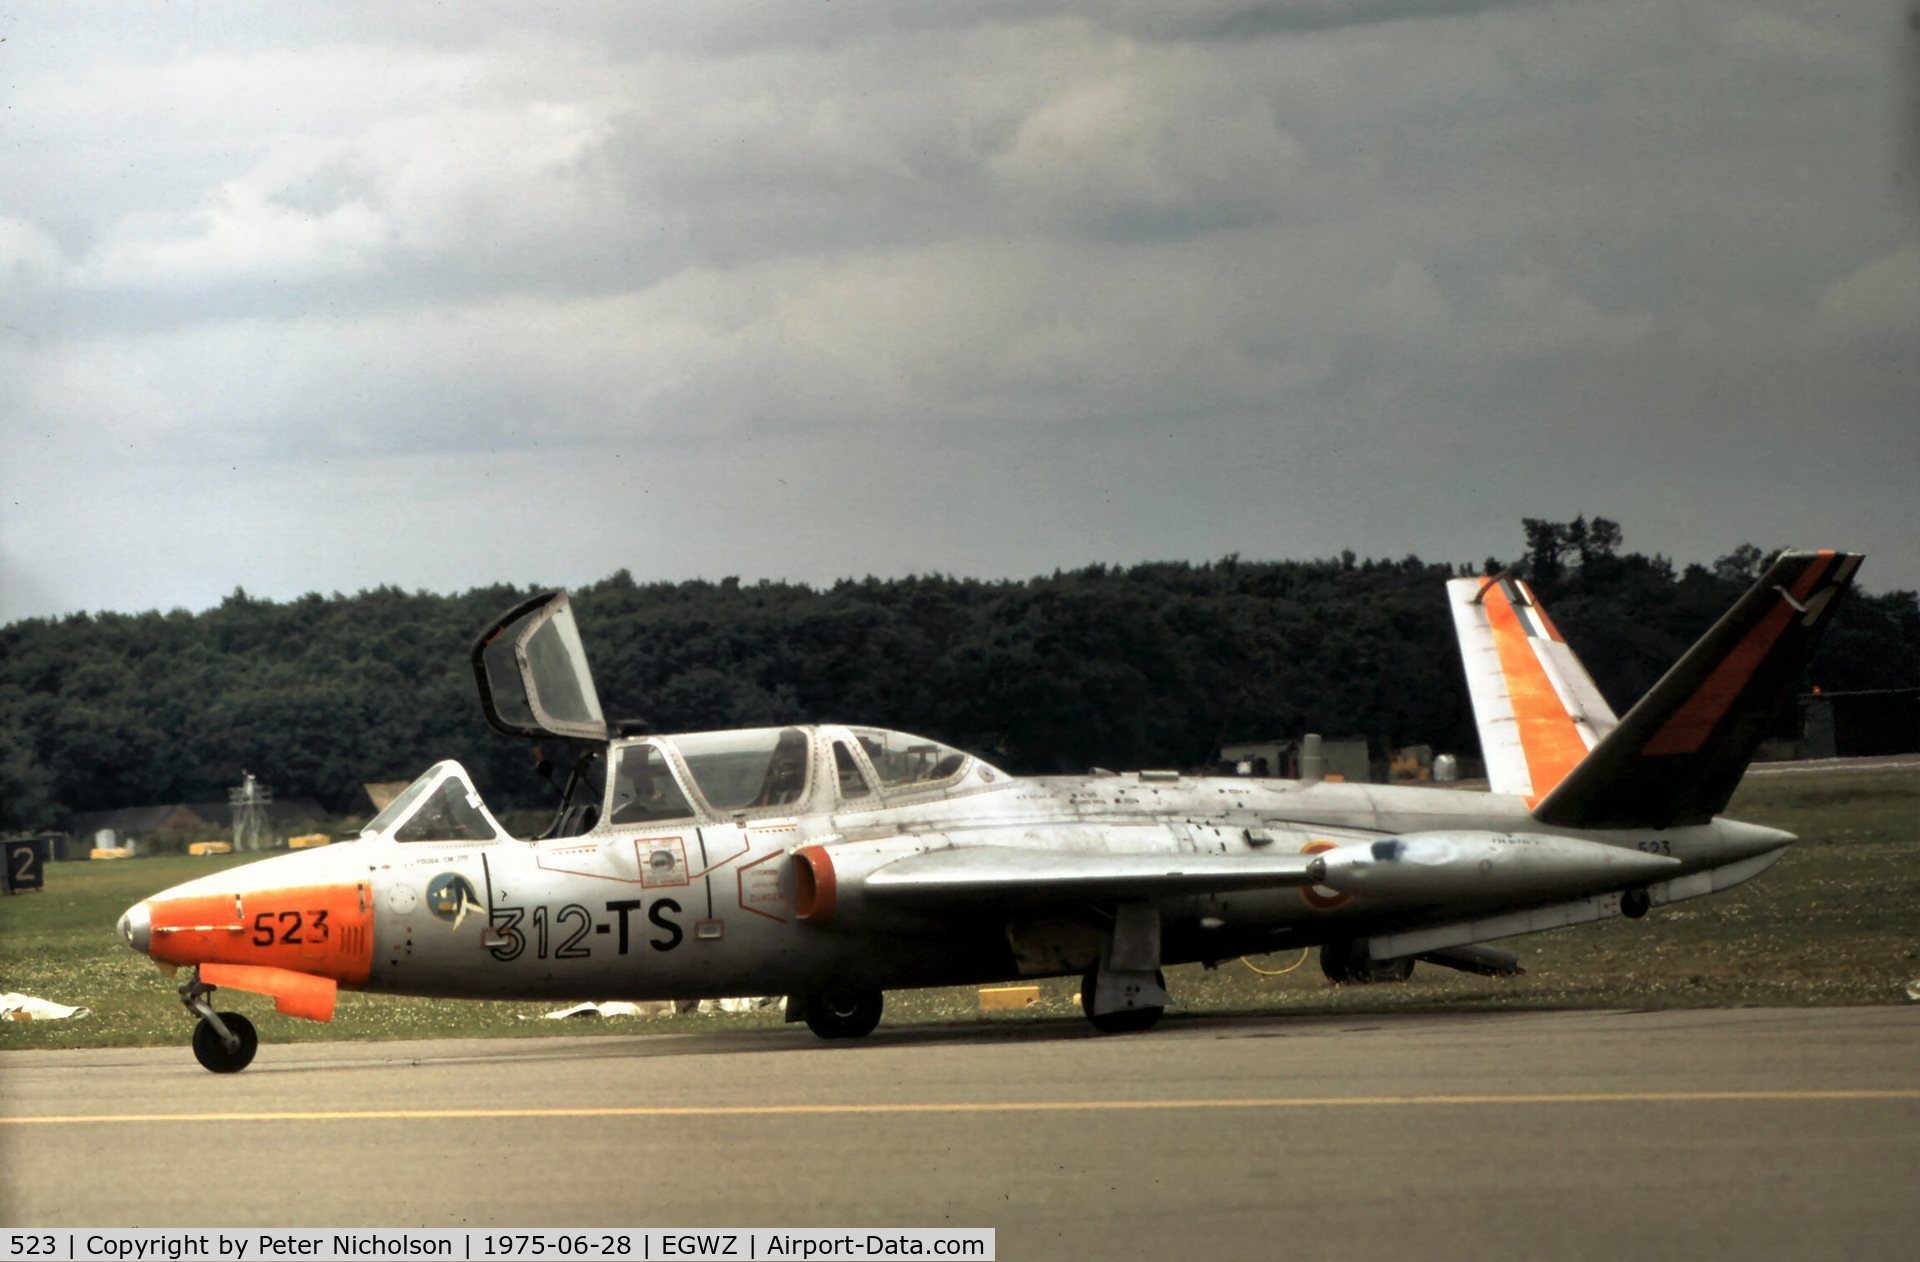 523, Fouga CM-170 Magister C/N 523, CM-170 Magister of French Air Force's GI-312 on display at the 1975 RAF Alconbury Airshow.